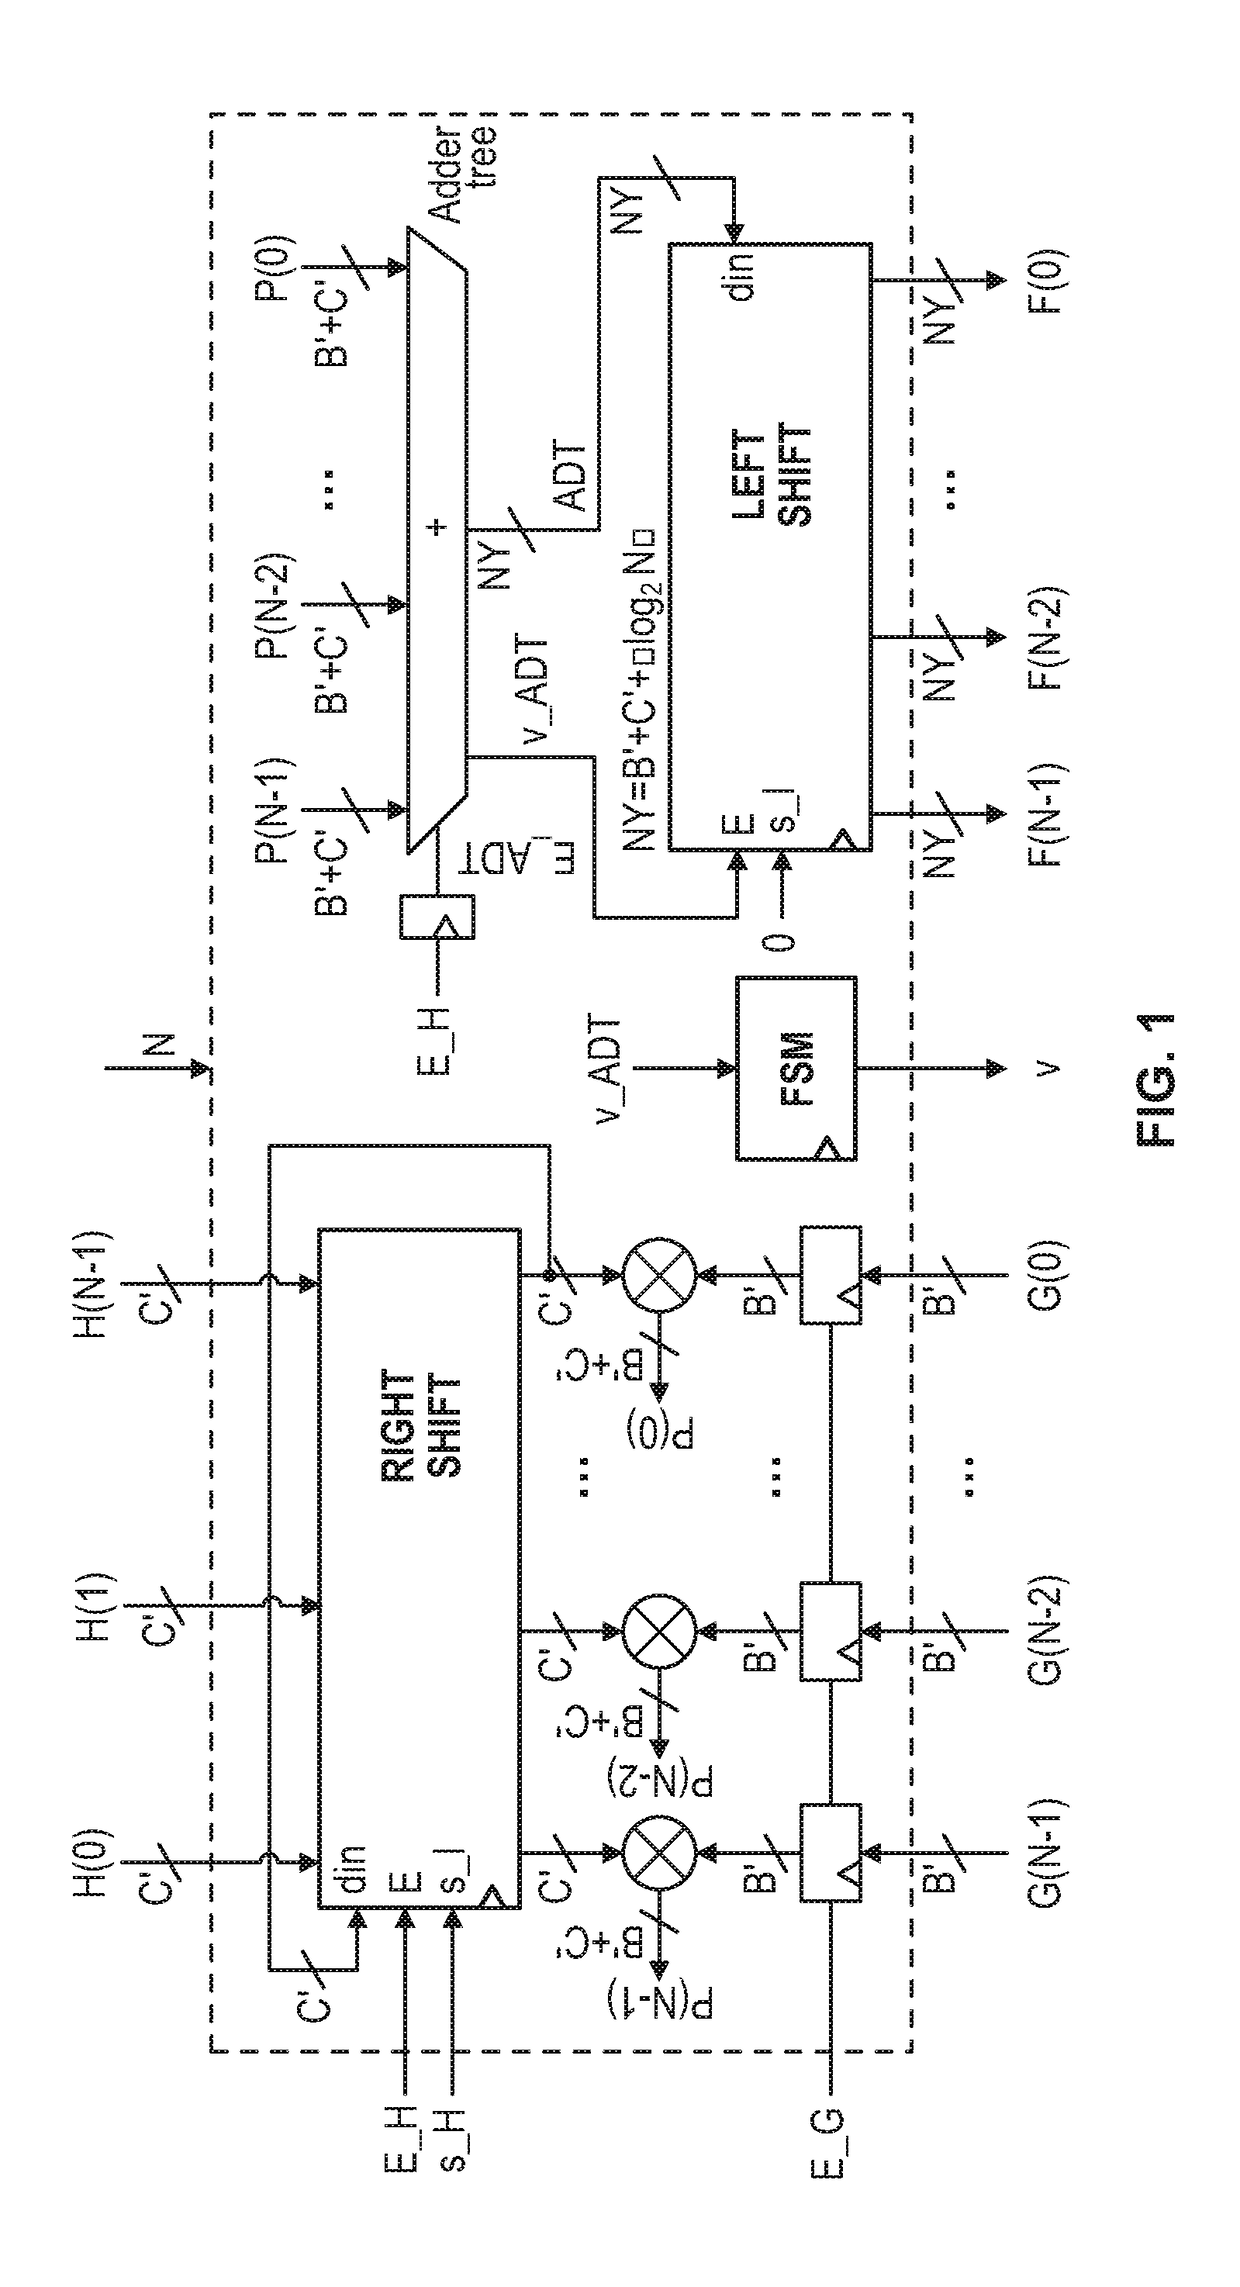 System and methods for computing 2-d convolutions and cross-correlations